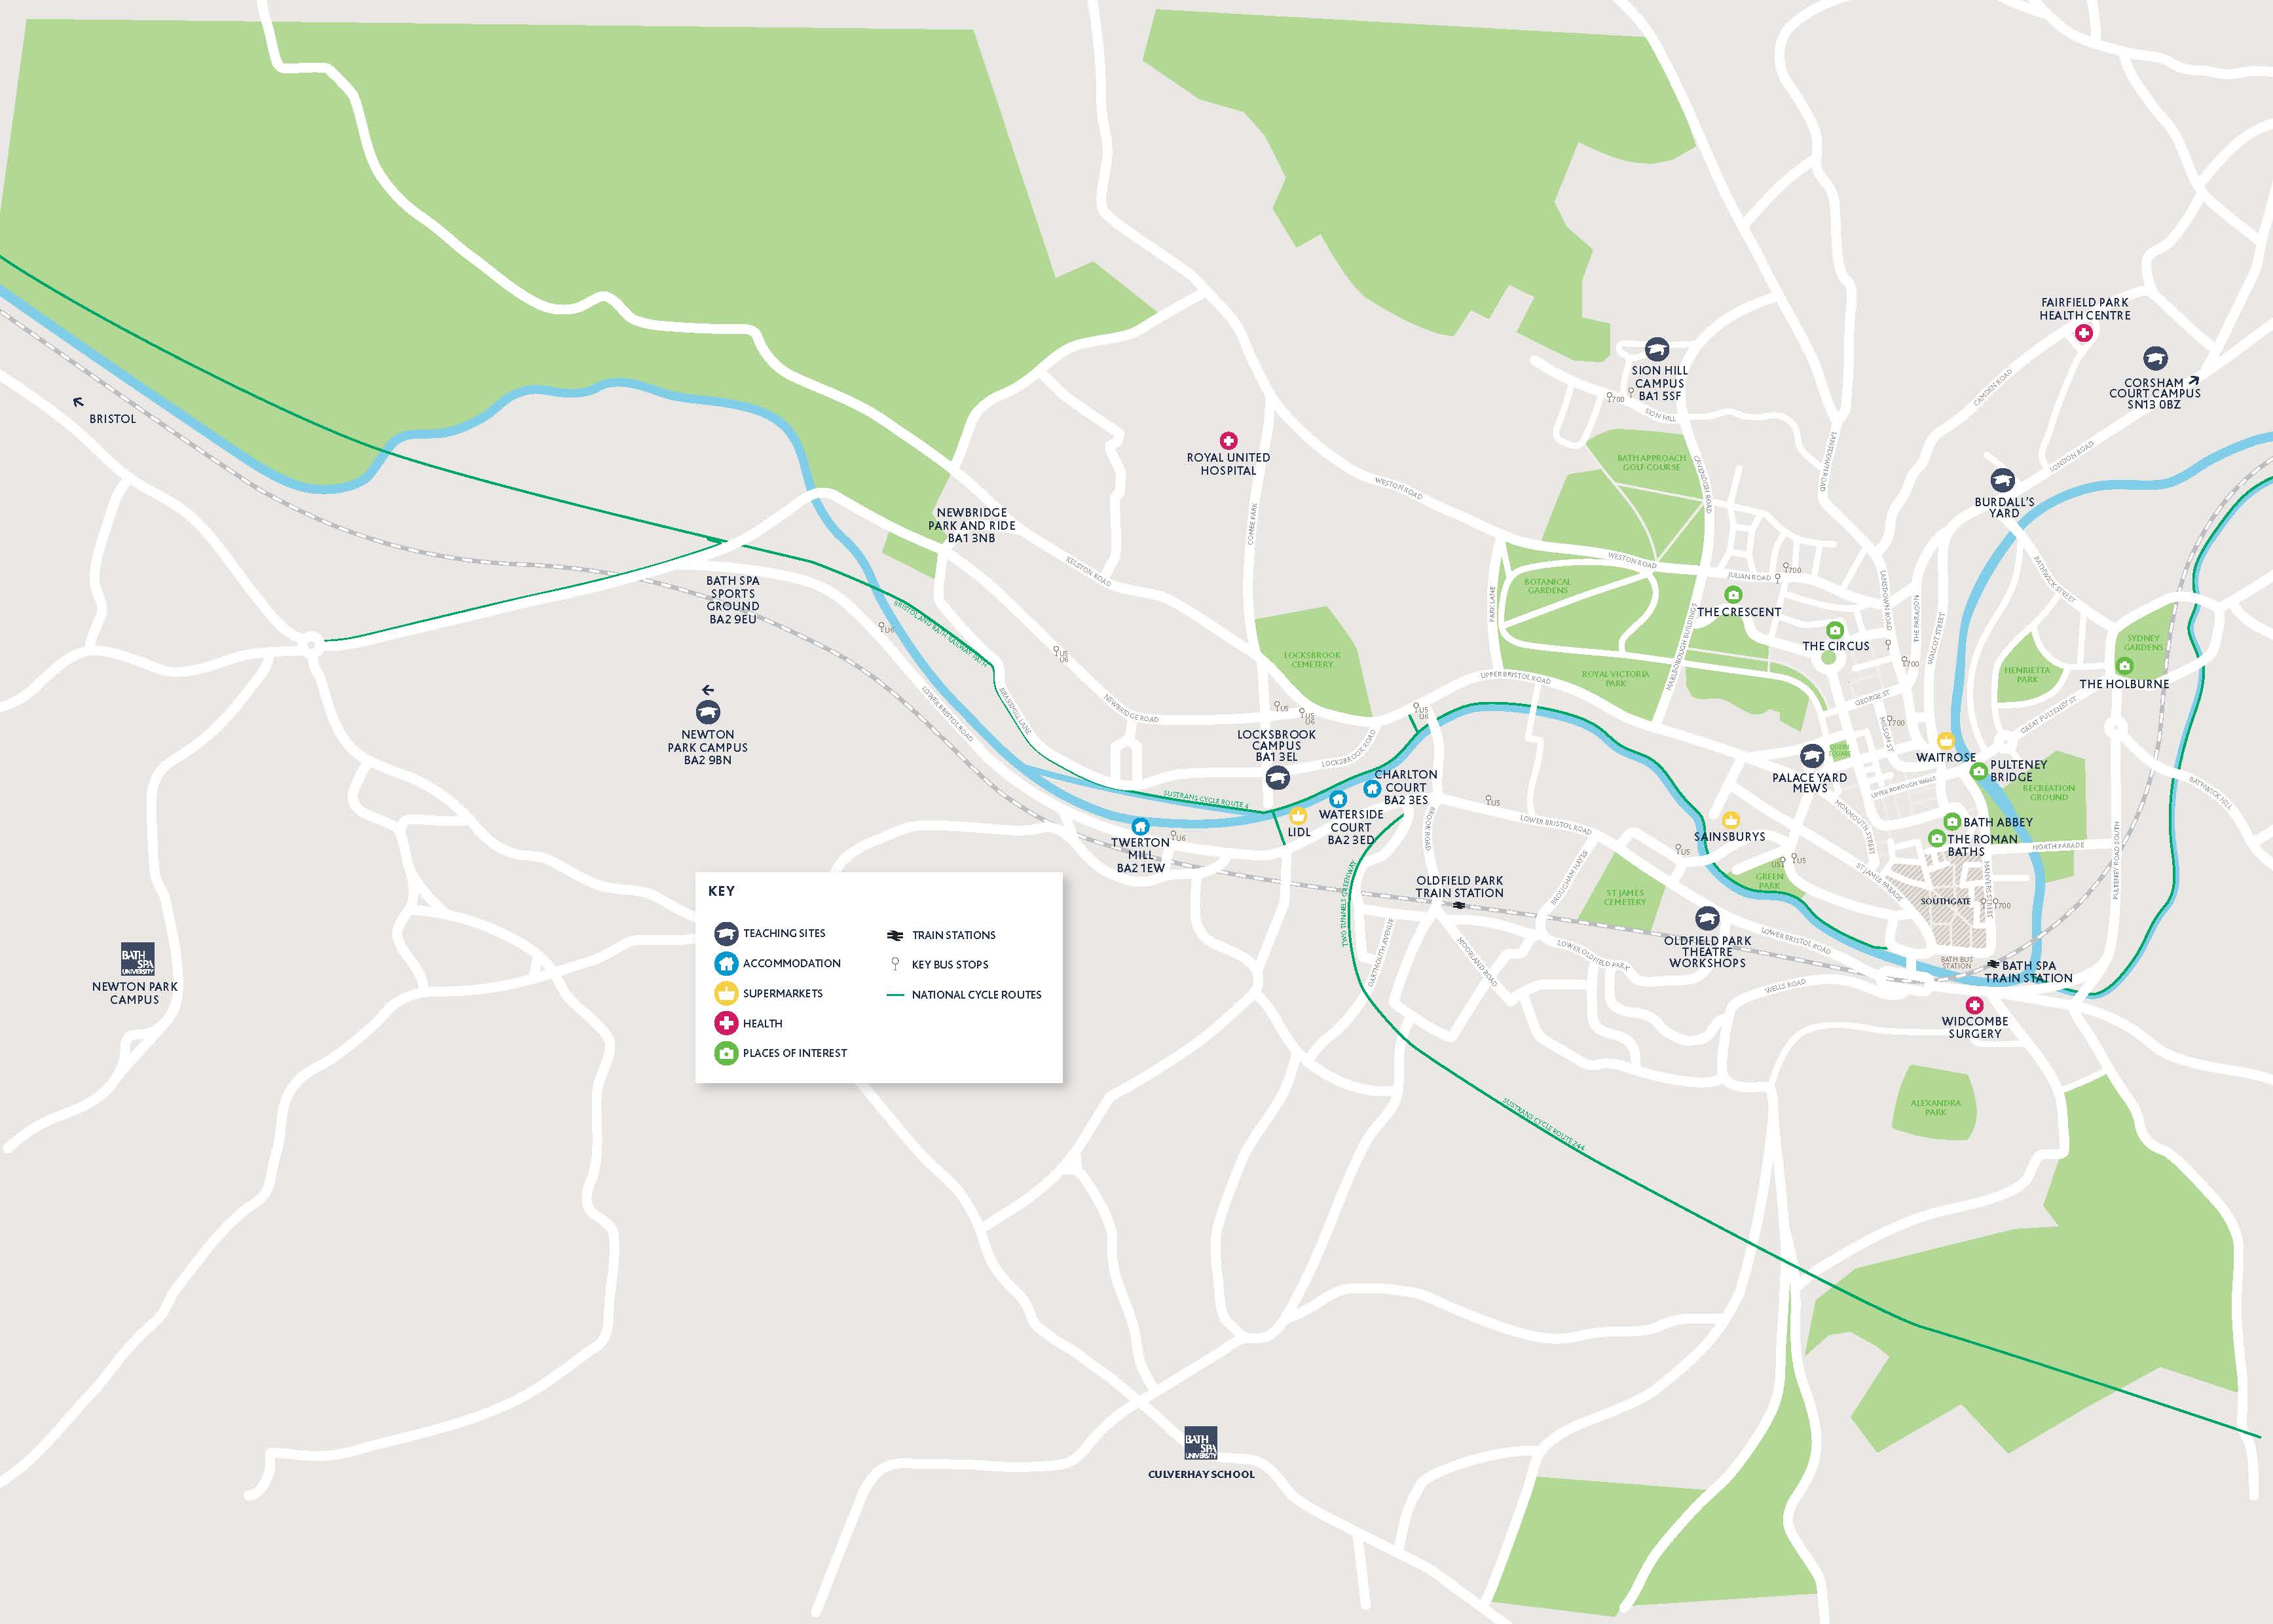 Map showing key campus and teaching locations of Bath Spa University, plus accommodation in Bath city centre